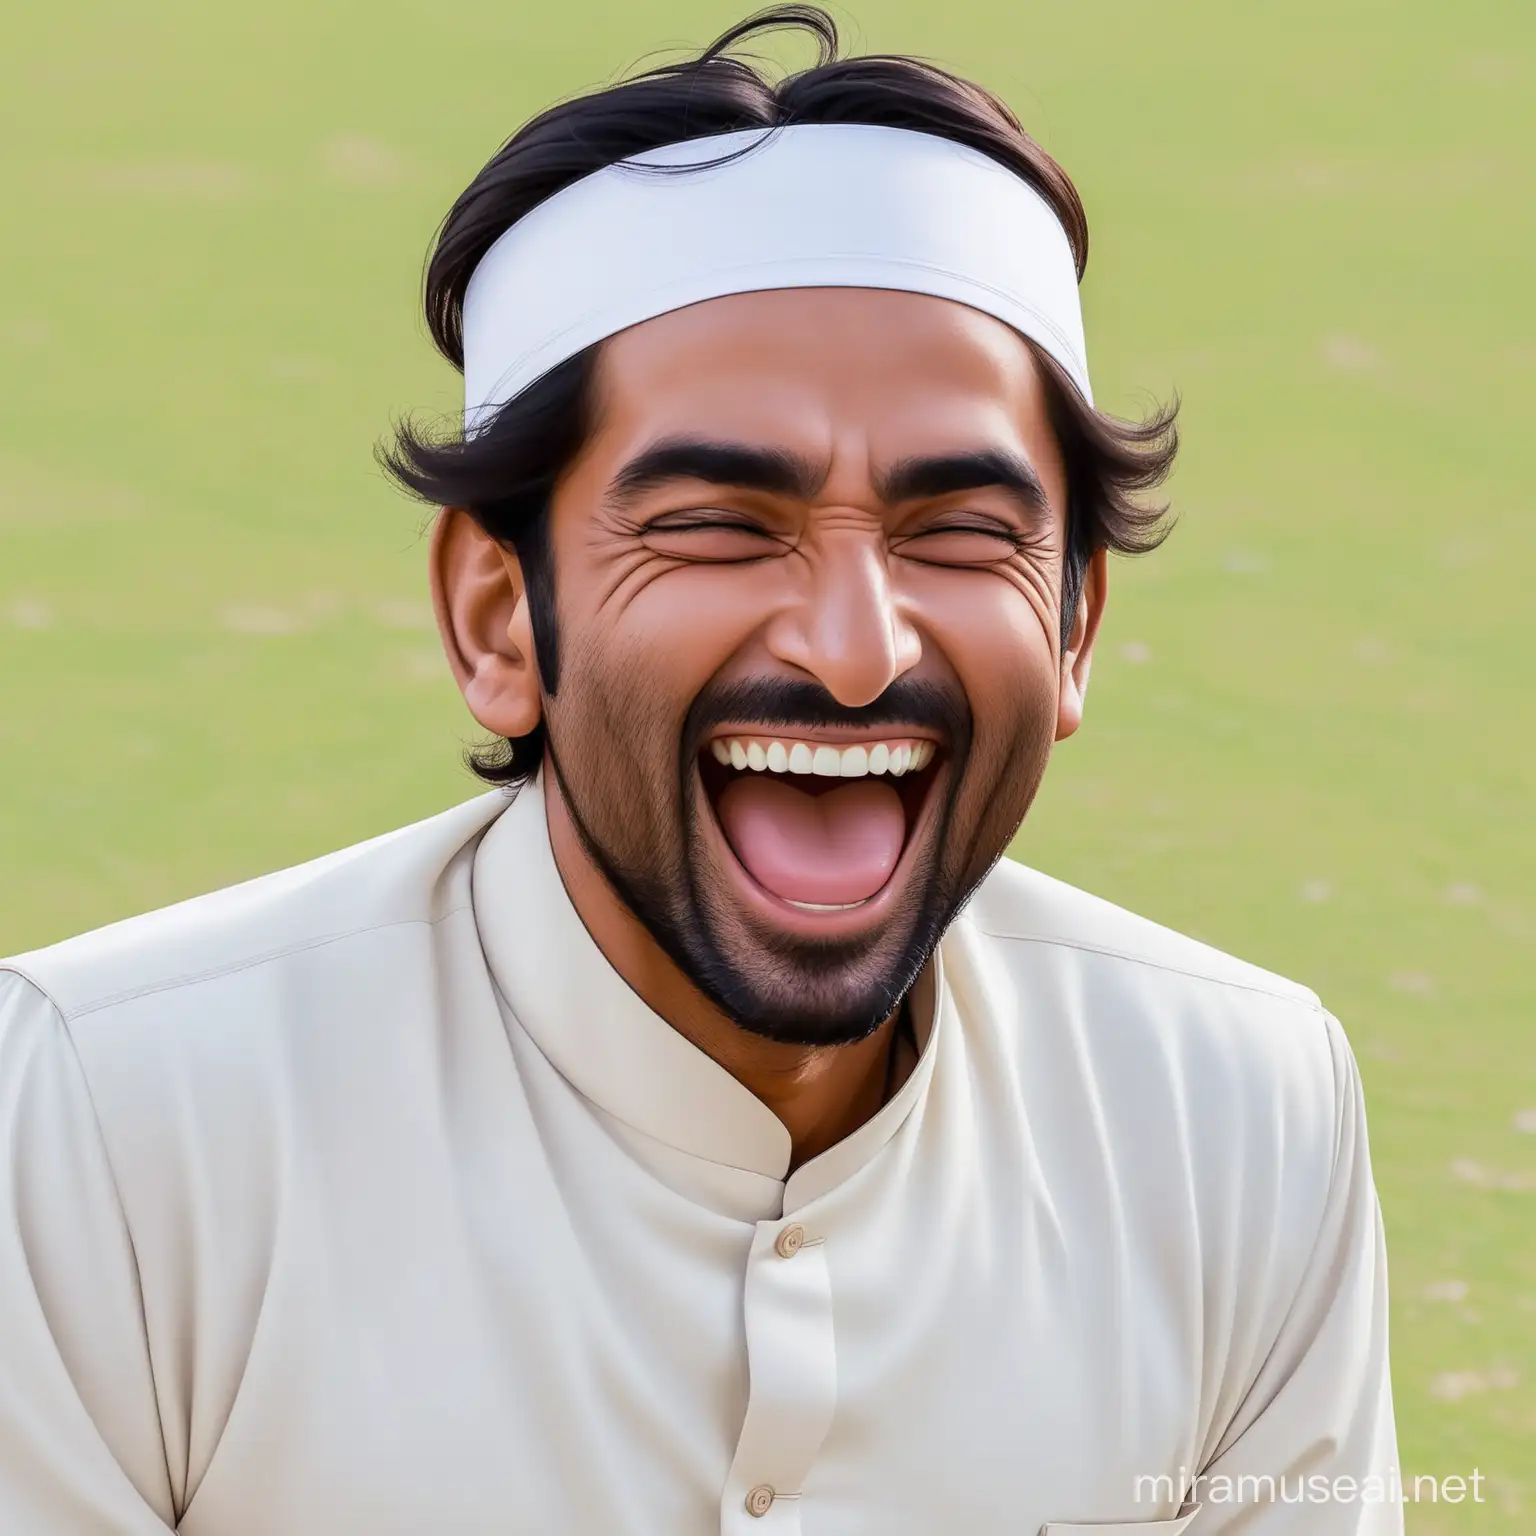 Pakistani man laughing extremely hilariously out 